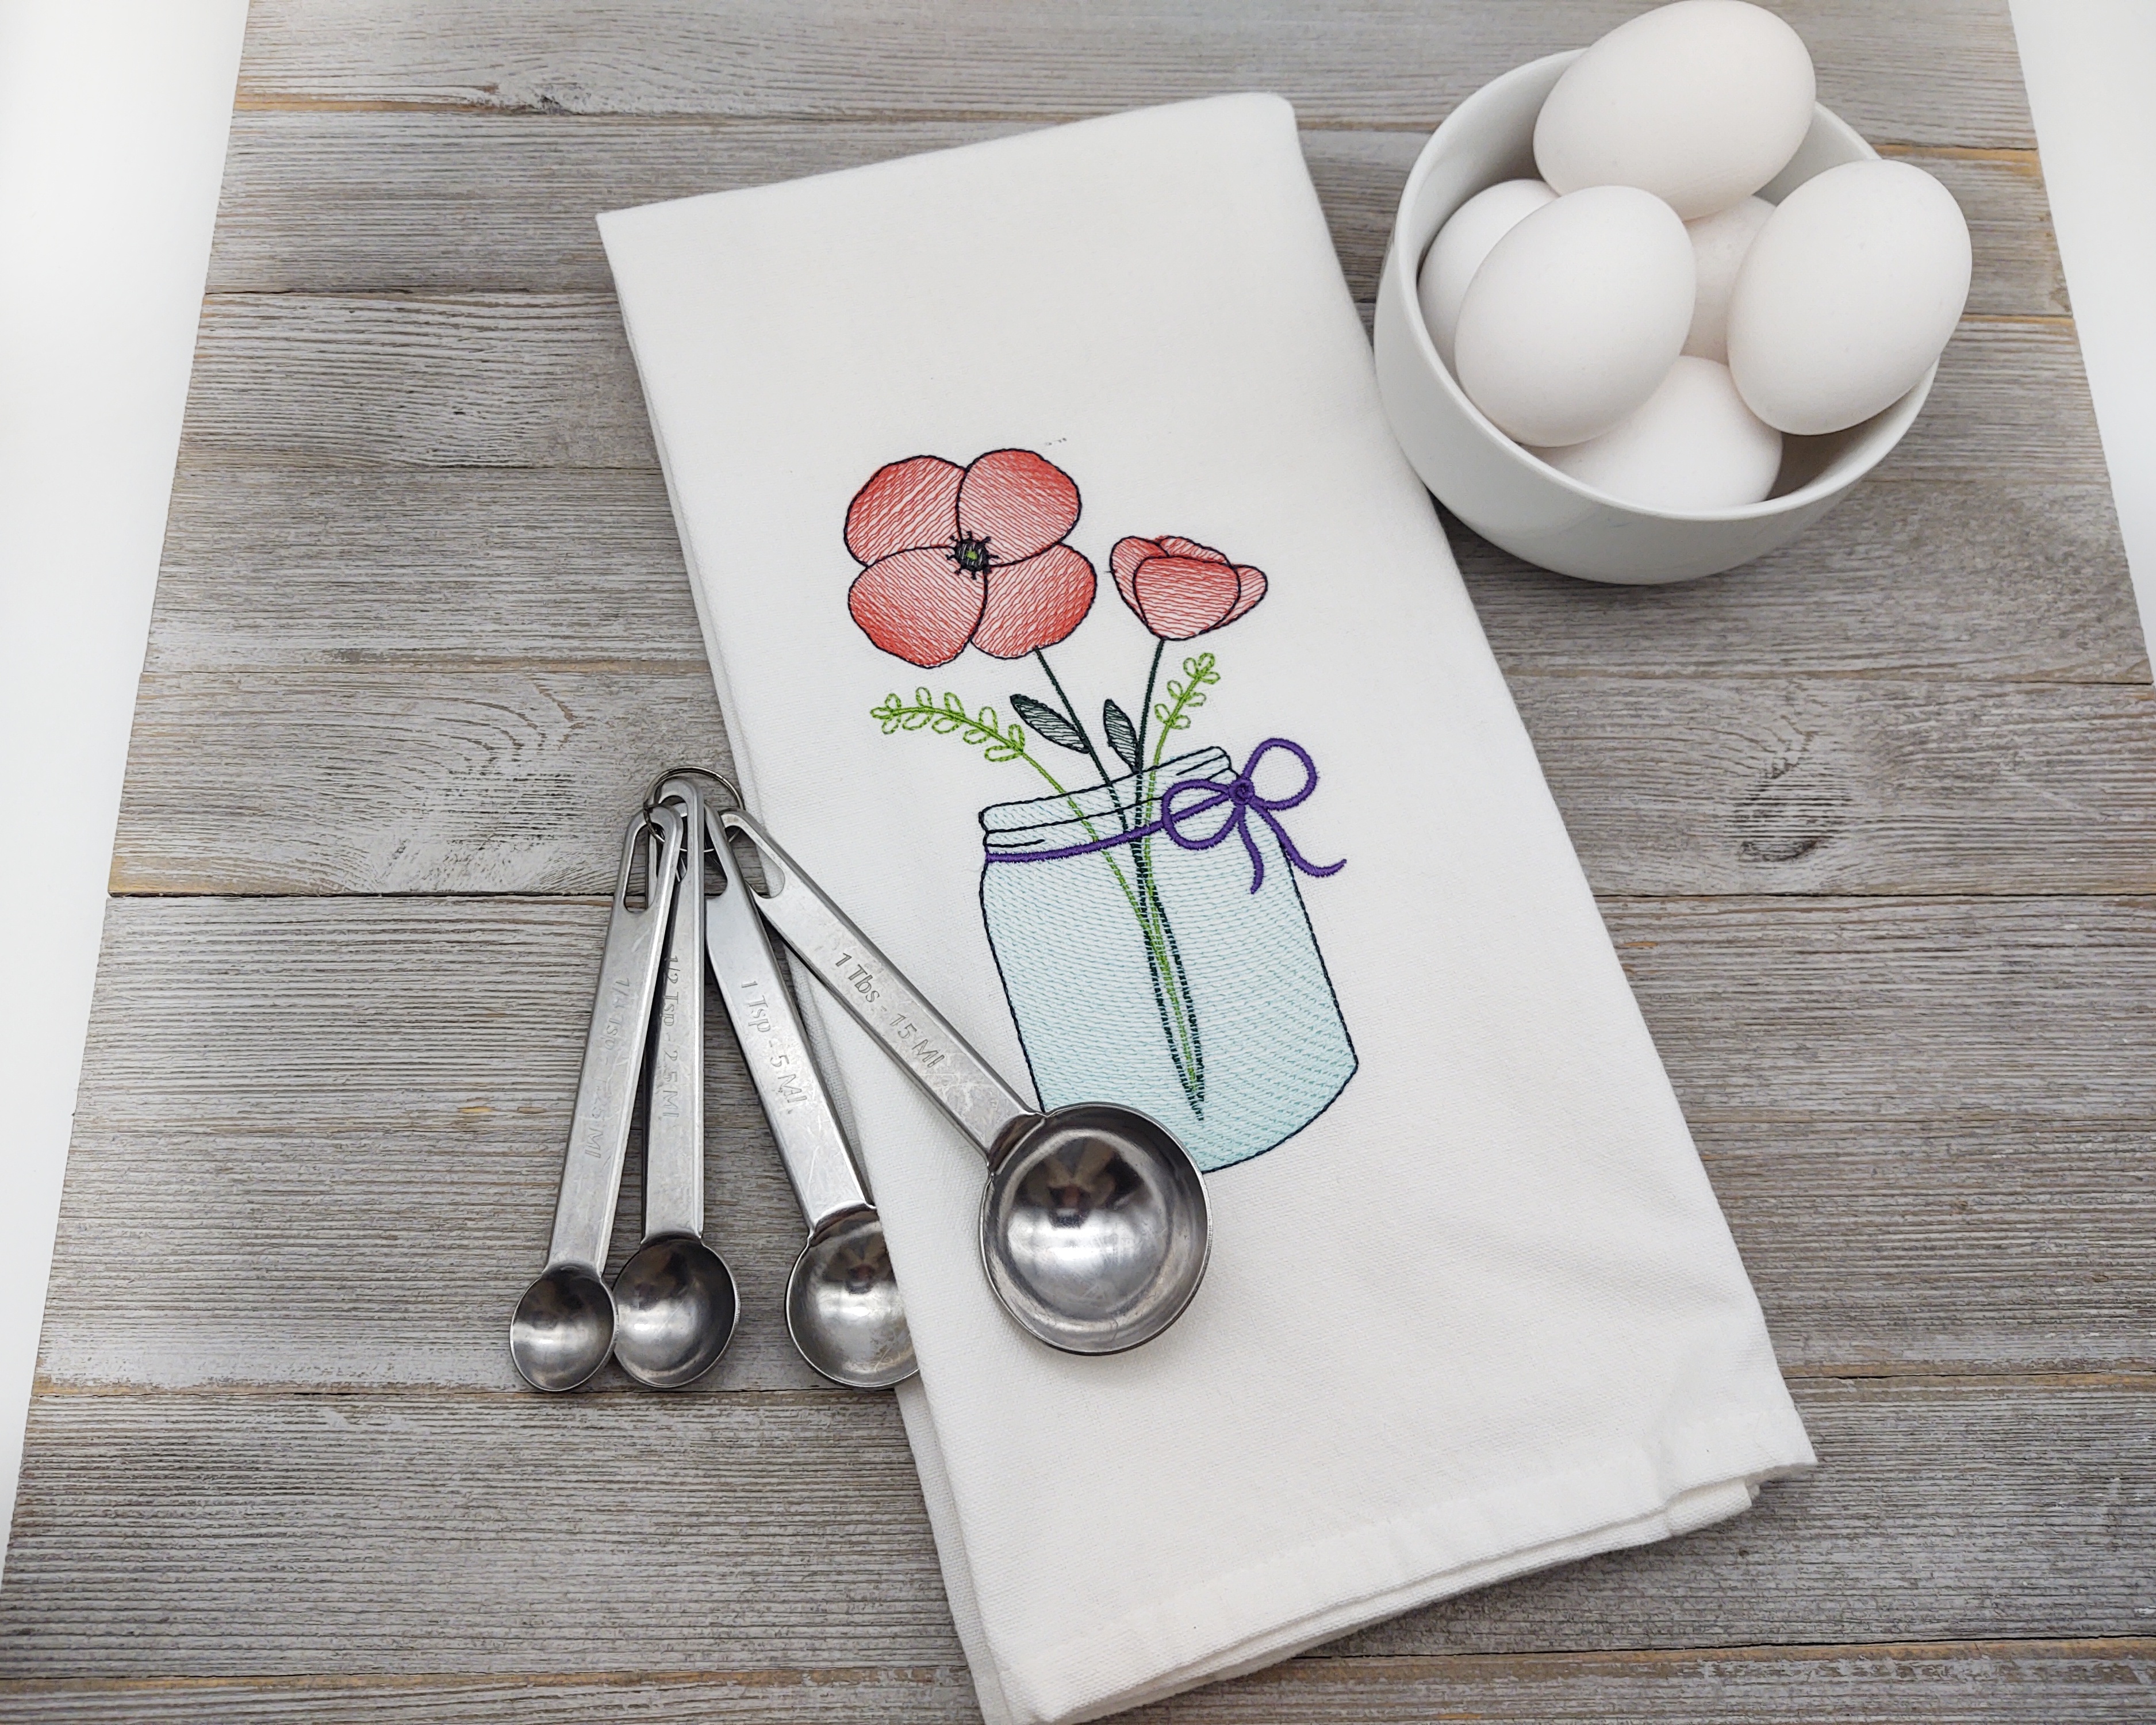 Get rid of the winter blahs or add some cheerful kitchen decor with this blue canning jar with red Poppies on a white cotton tea towel.  Hang it over the the oven handle and show it off.

    What you get:  One white kitchen towel with embroidered red poppies in a blue jar.

    Fabric color:  White flat weave tea towel, red poppies with a sprig of greenery, green leaves and a dark purple bow. 

    Fabrics used:  white flat weave kitchen towel, tear away stabilizer and polyester machine embroidery thread.

    Size:  Dish towel measures 17.5 x 26 inches.  It has a hanging loop on the back side so it can be hung from a hook. Dish towel has been preshrunk.

    Care:  Hand-machine wash in cold water with like colors.  Air dry or dry in dryer.  Press with warm iron on wrong side if necessary.  No bleach.
    List is for hand towel only.  Additional items in pictures are not included.

**NOTE:  all towels I have in my shop are meant to be decorative and are NOT meant for heavy duty use.  They can withstand light daily use, and machine washing.